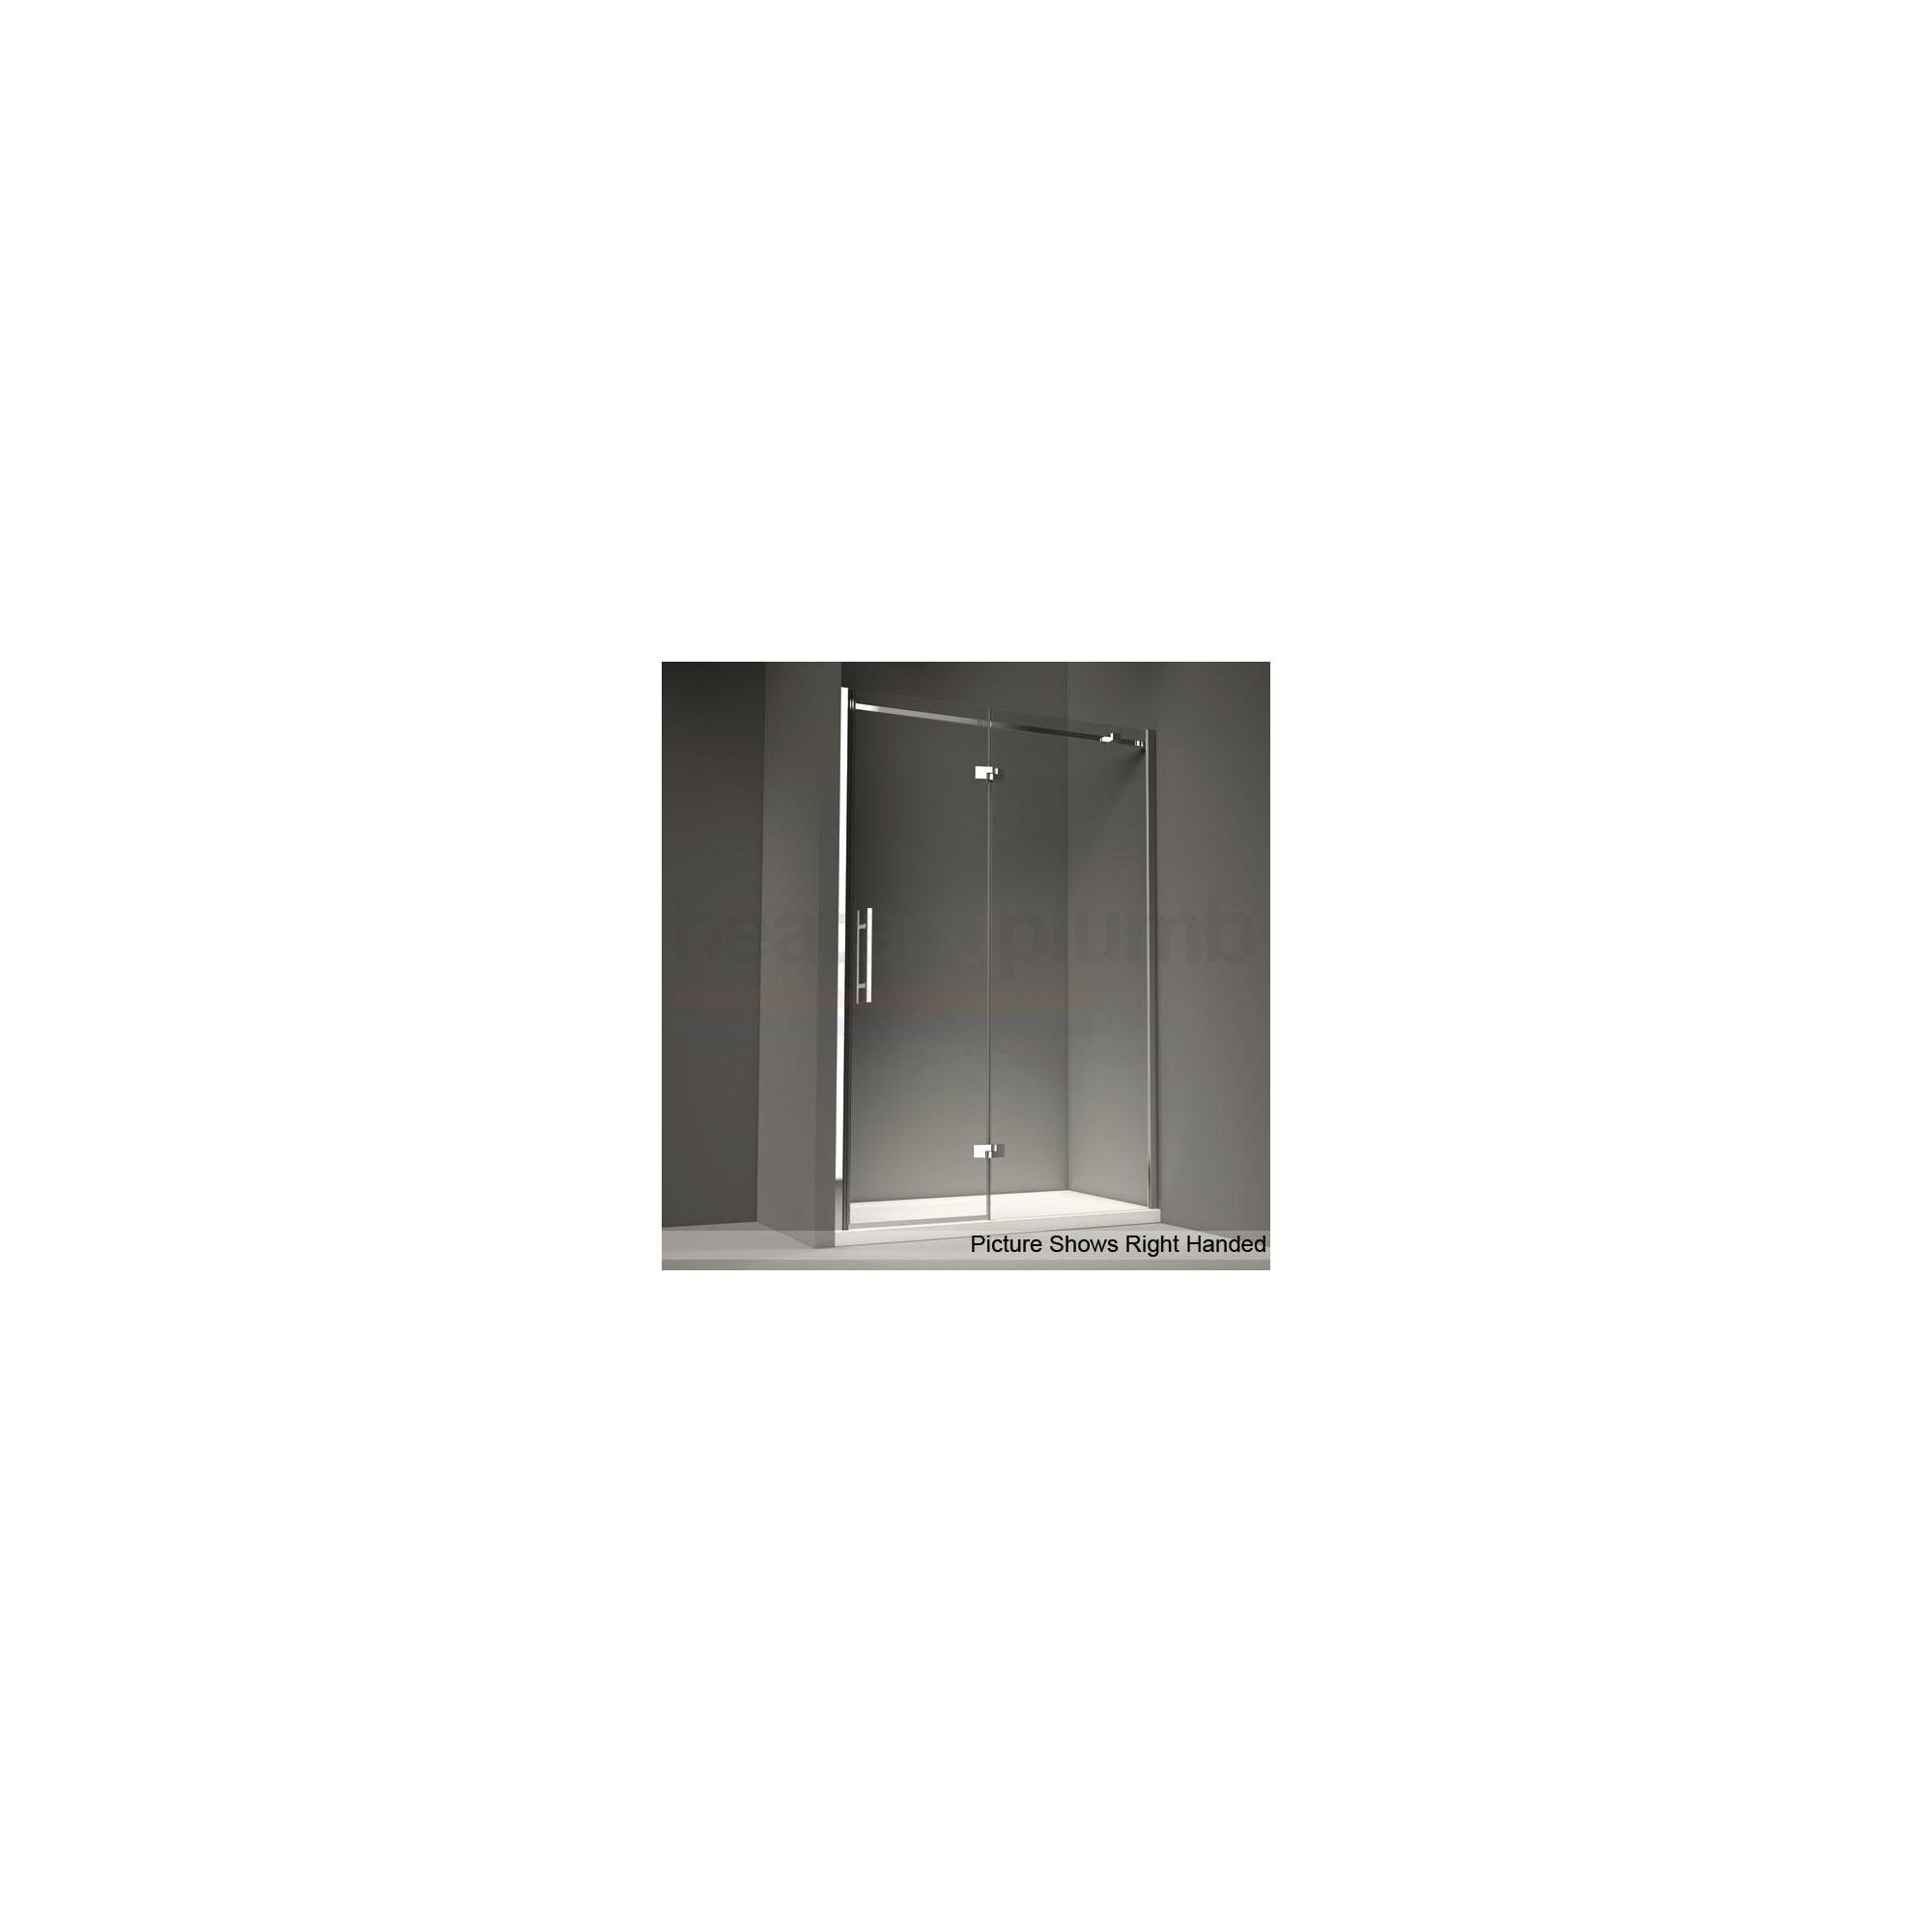 Merlyn Series 9 Inline Hinged Door ALCOVE Shower Enclosure 1000mm x 800mm (Complete with Tray) - 8mm Glass at Tesco Direct